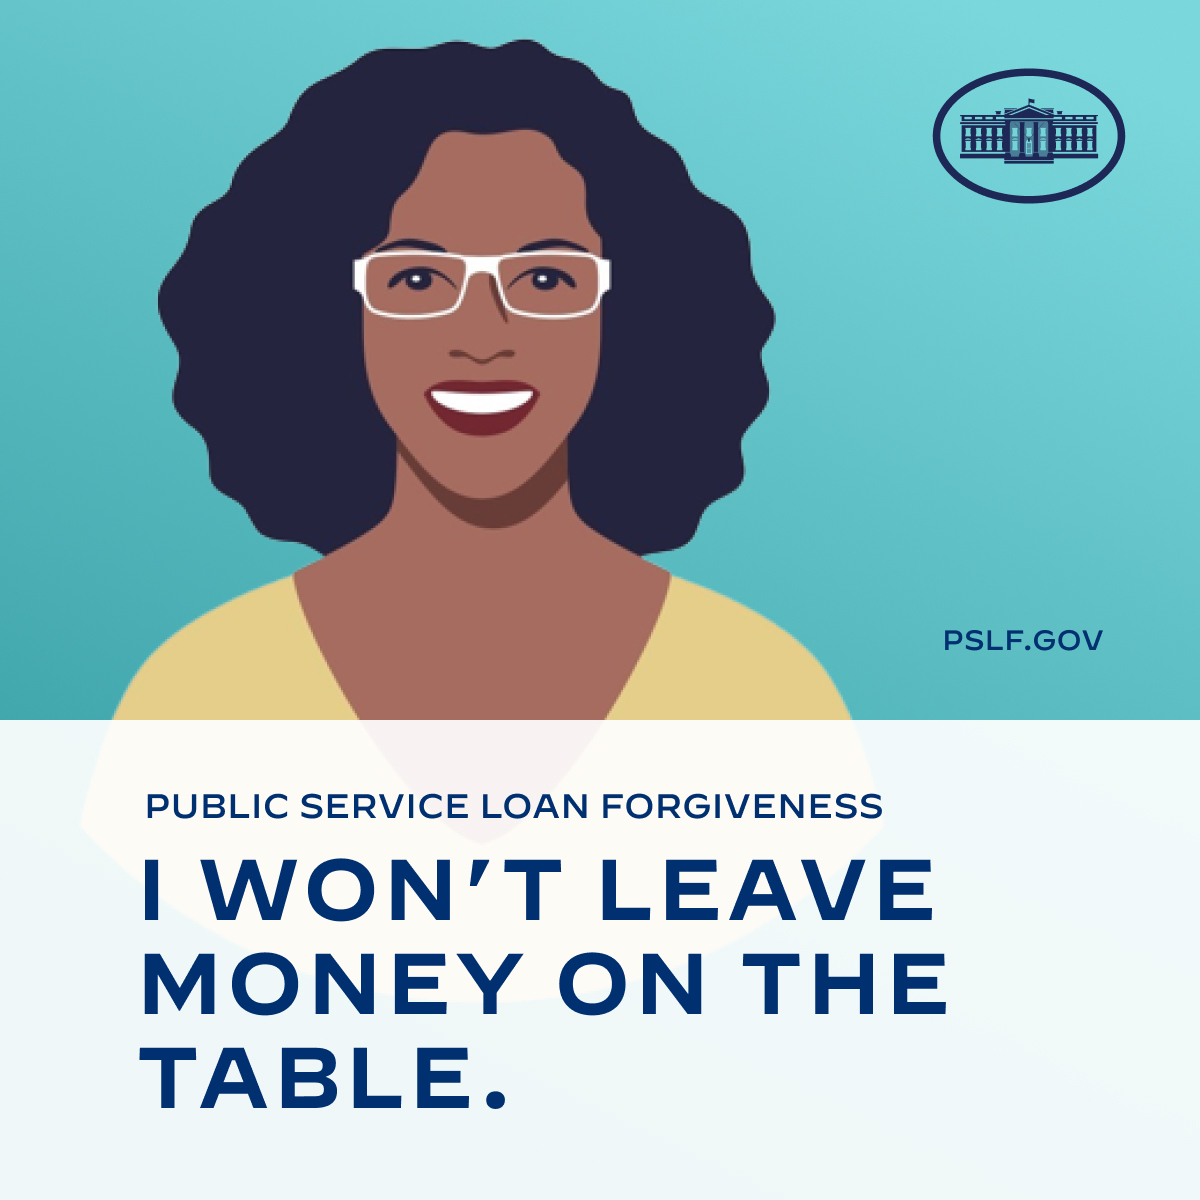 Do you have federal student loans? If so, please join #SuccessBoston on Nov 27 for a webinar on the Public Service Loan Forgiveness (#PSLF) program and learn how educators & nonprofit employees may qualify for debt relief! tinyurl.com/2p98rcxk #StudentLoans #StudentDebt